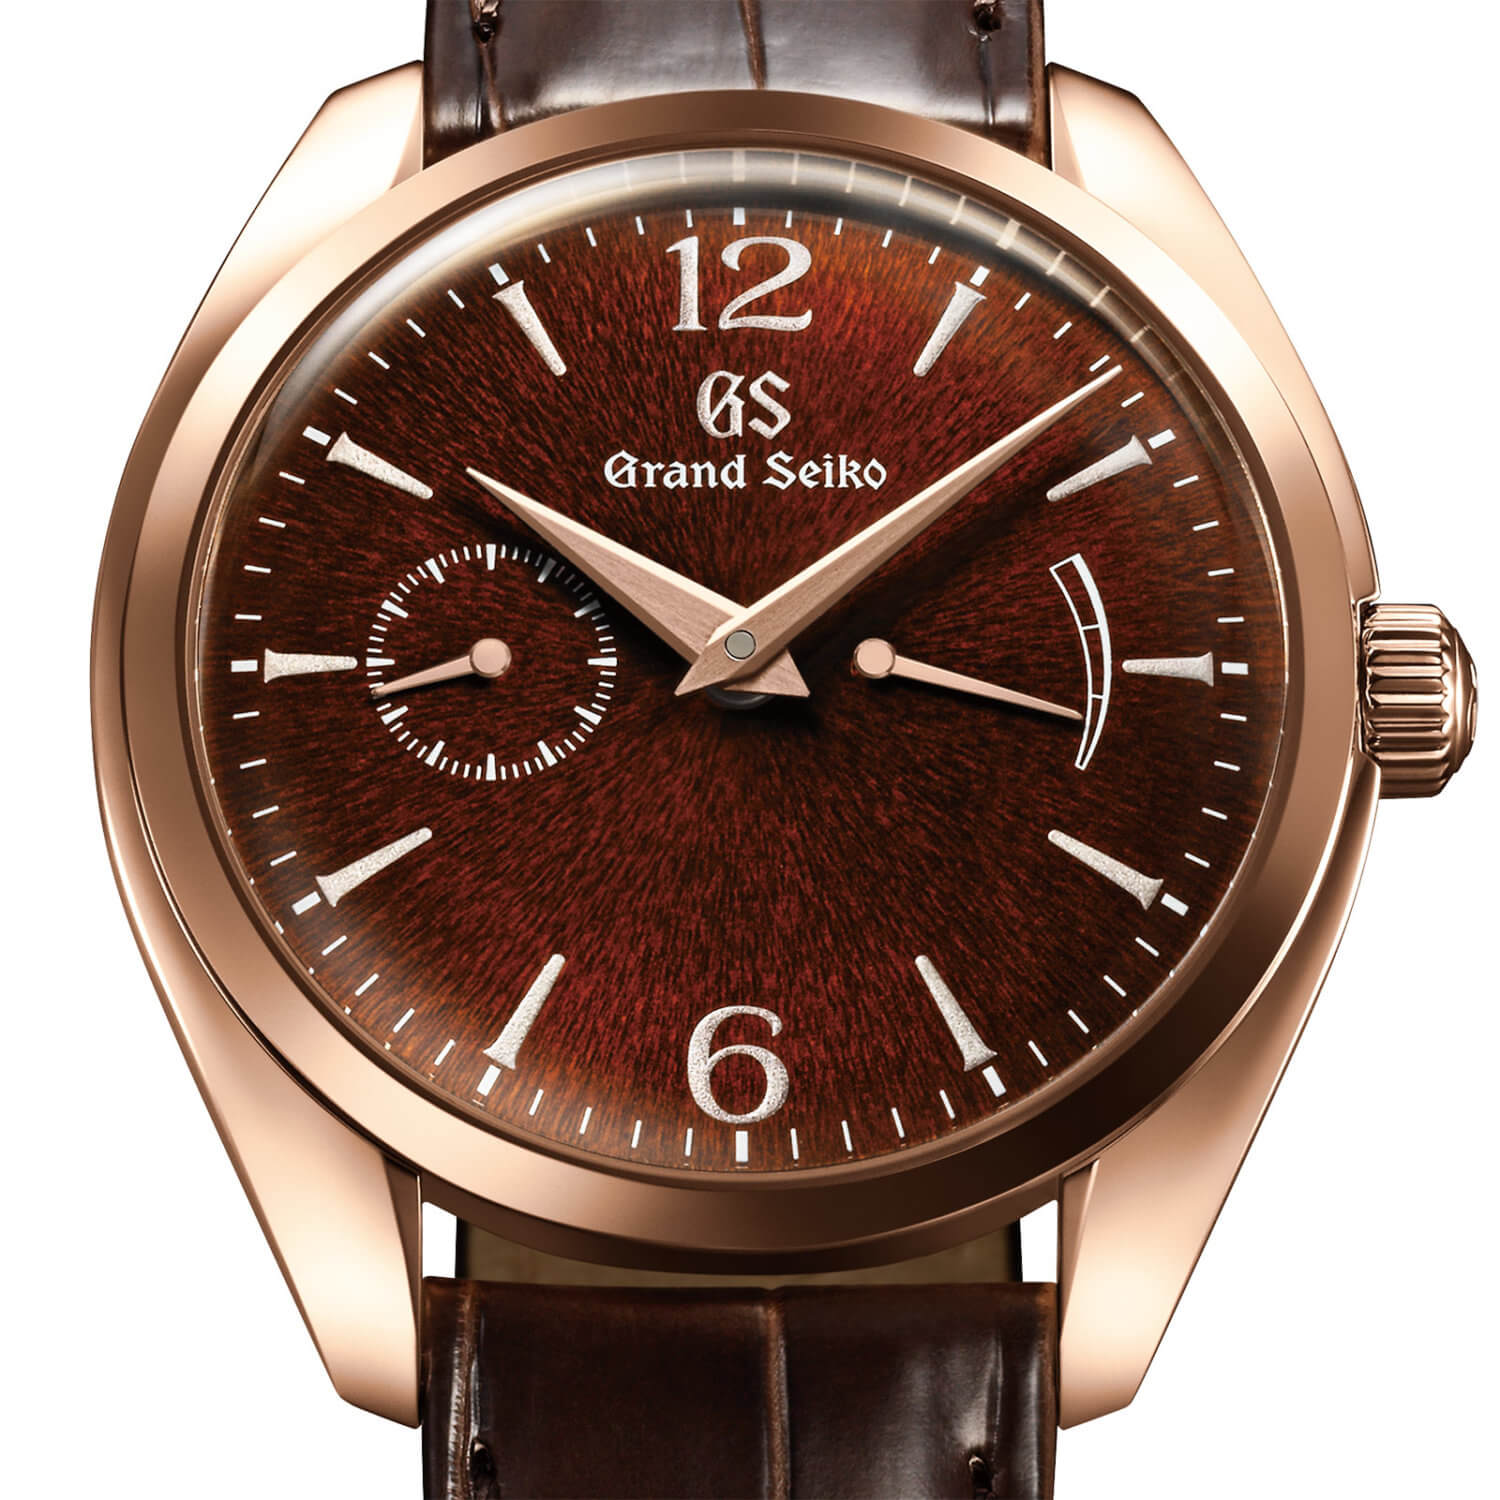 Grand Seiko's Urushi Dials Give The Elegance Collection A Competitive ...